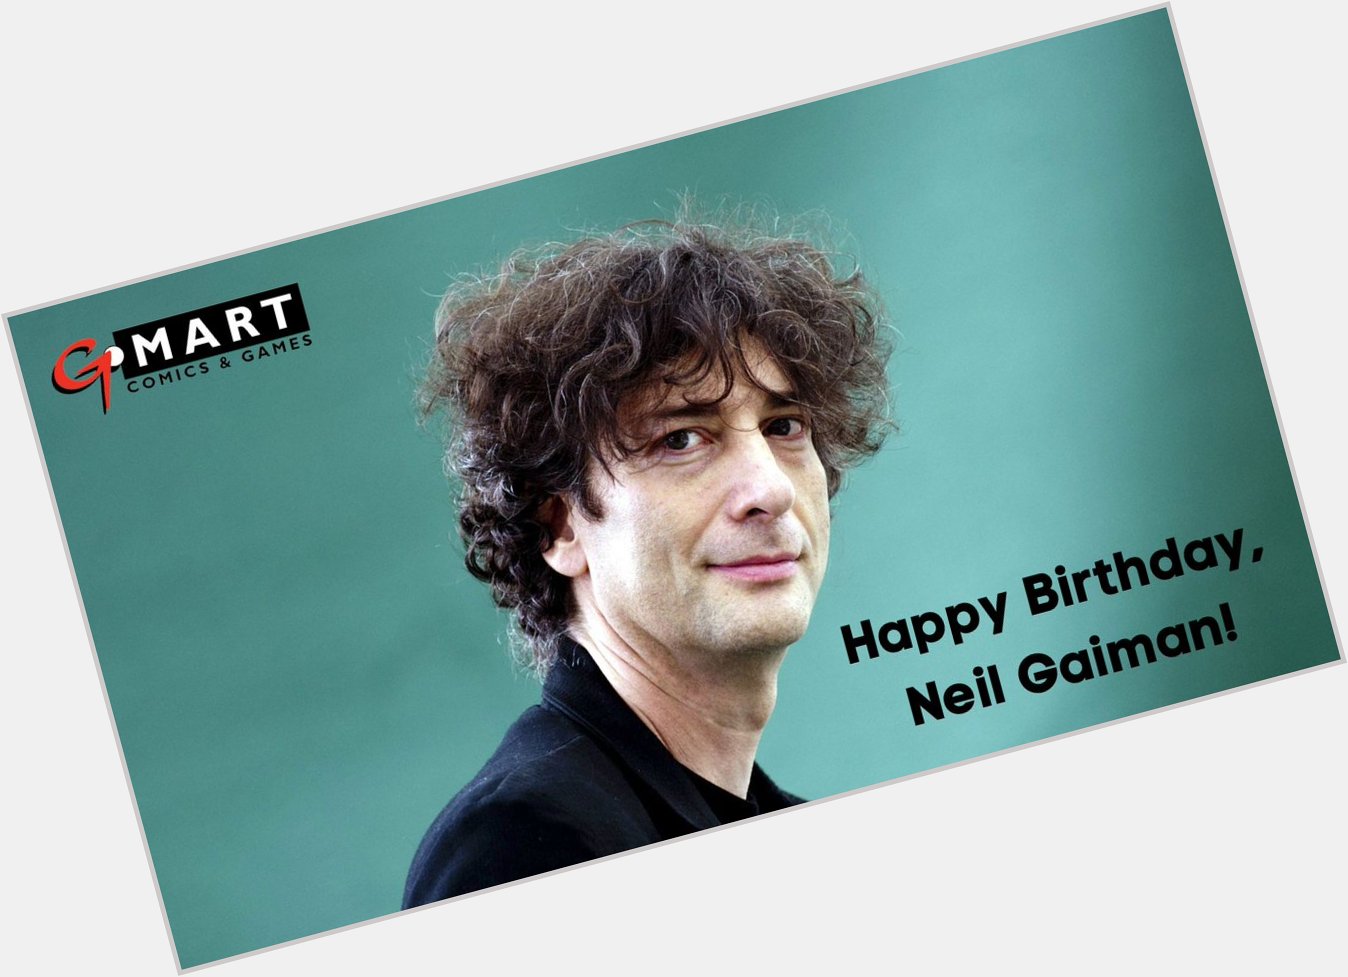 Happy Birthday to a pure genius! We are glad you exist Neil Gaiman! Keep creating! 